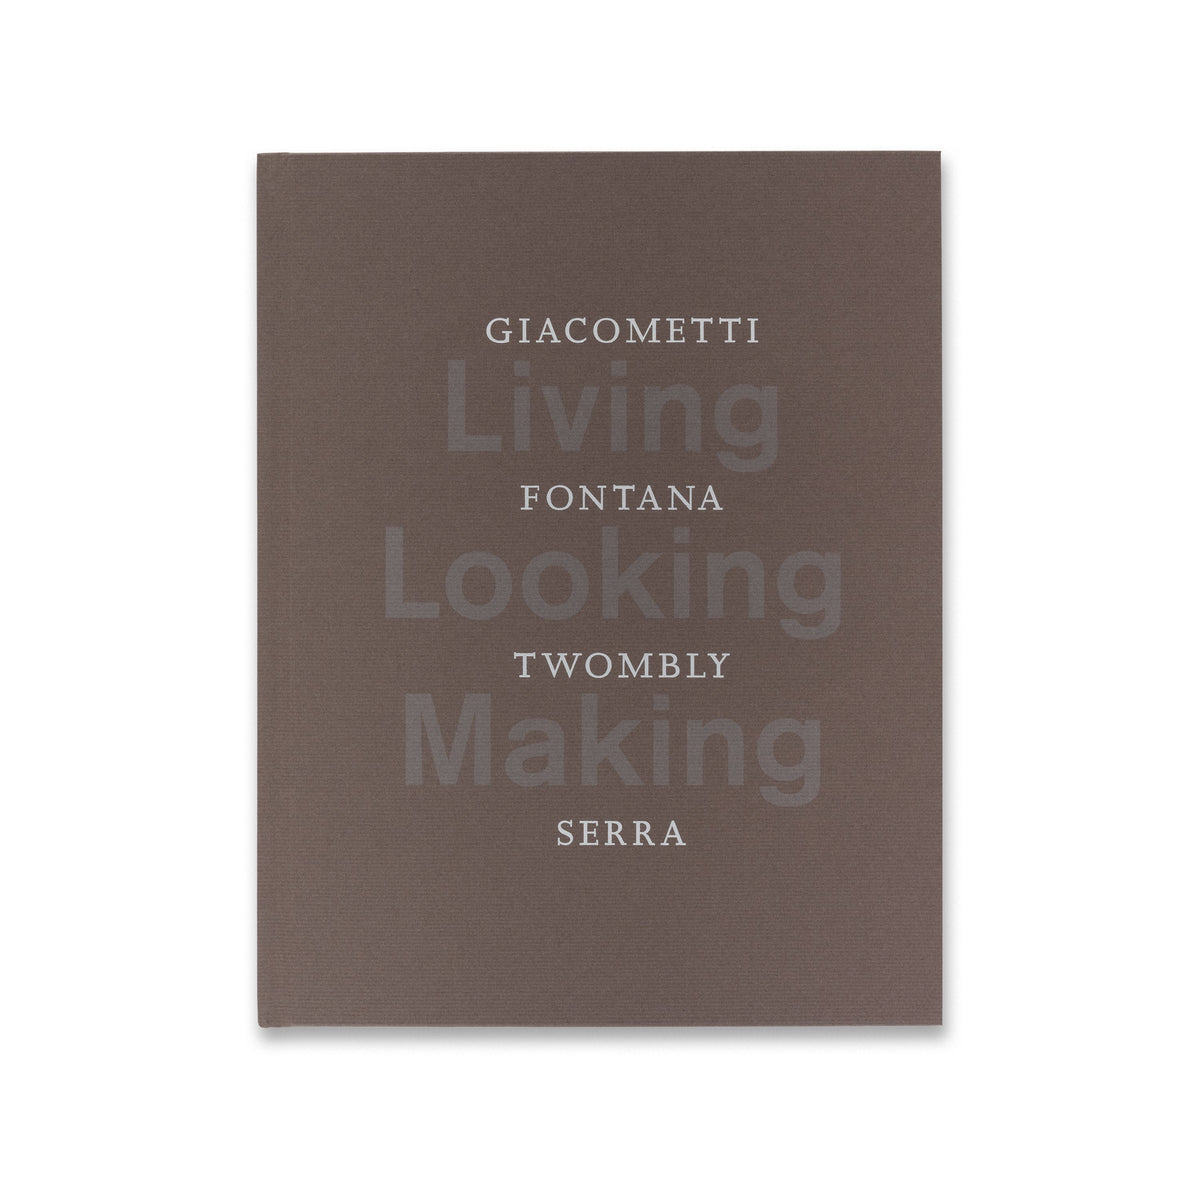 Cover of the book Living, Looking, Making: Giacometti, Fontana, Twombly, Serra